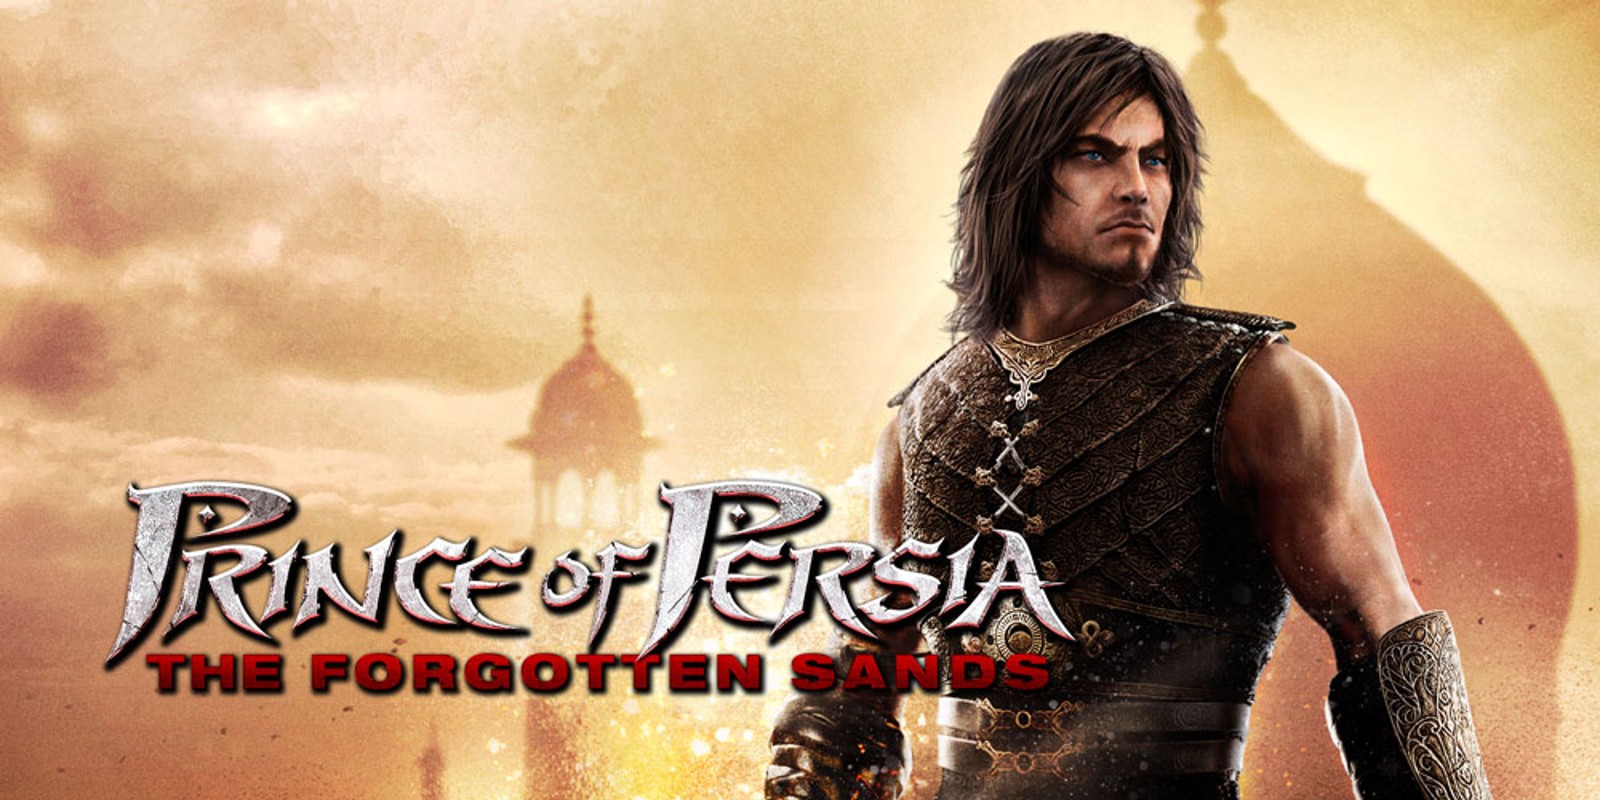 prince-of-persia-the-forgotten-sands-free-steamunlocked